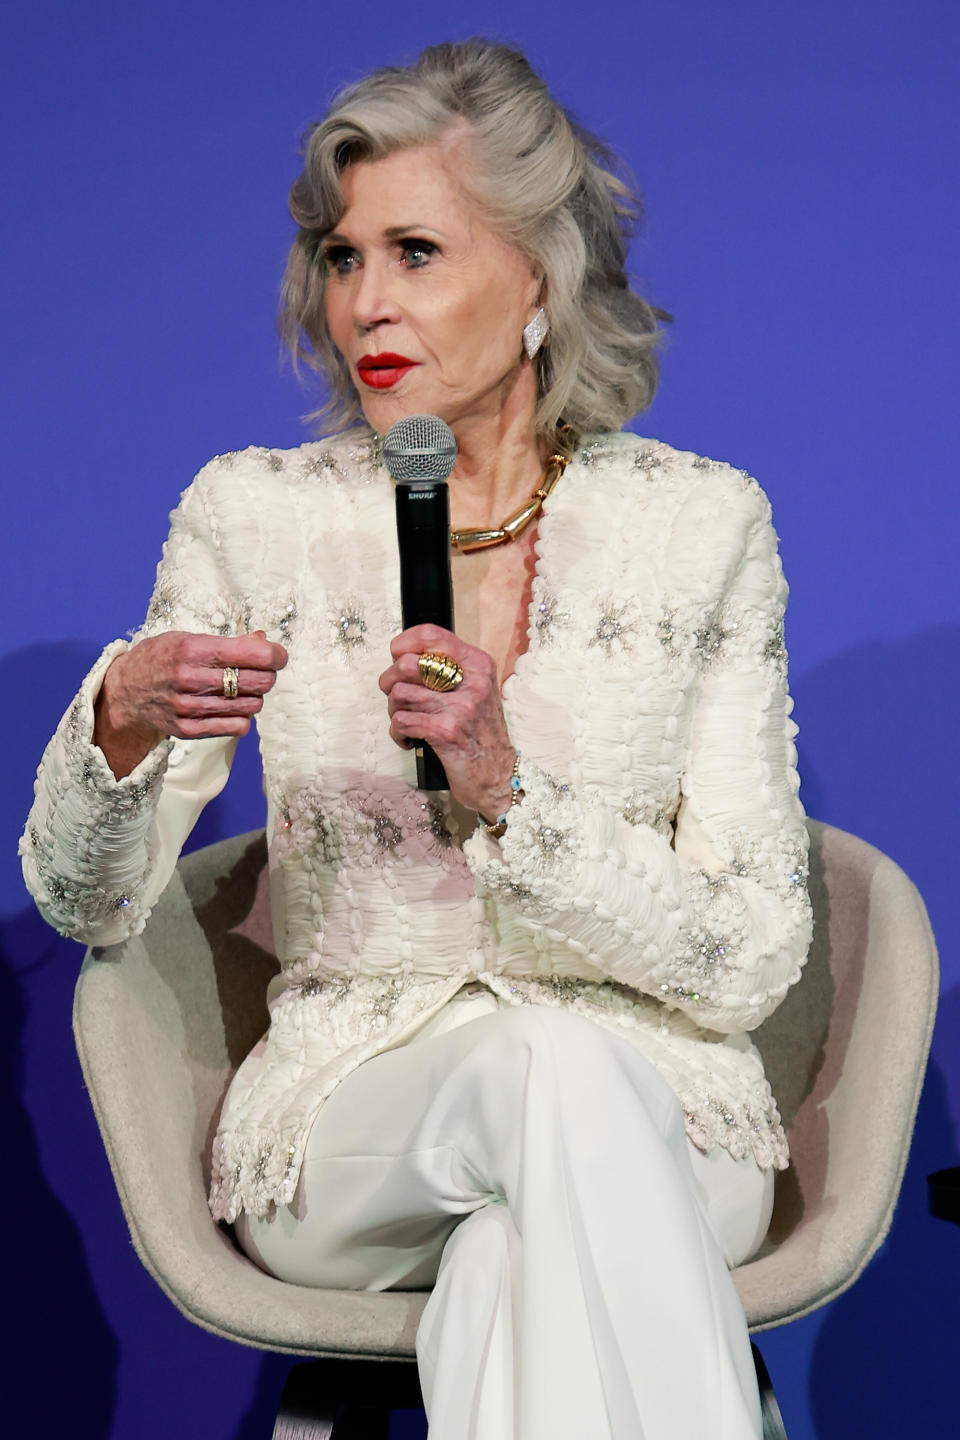 Jane Fonda wearing a textured, embellished blazer and white pants while speaking at an event